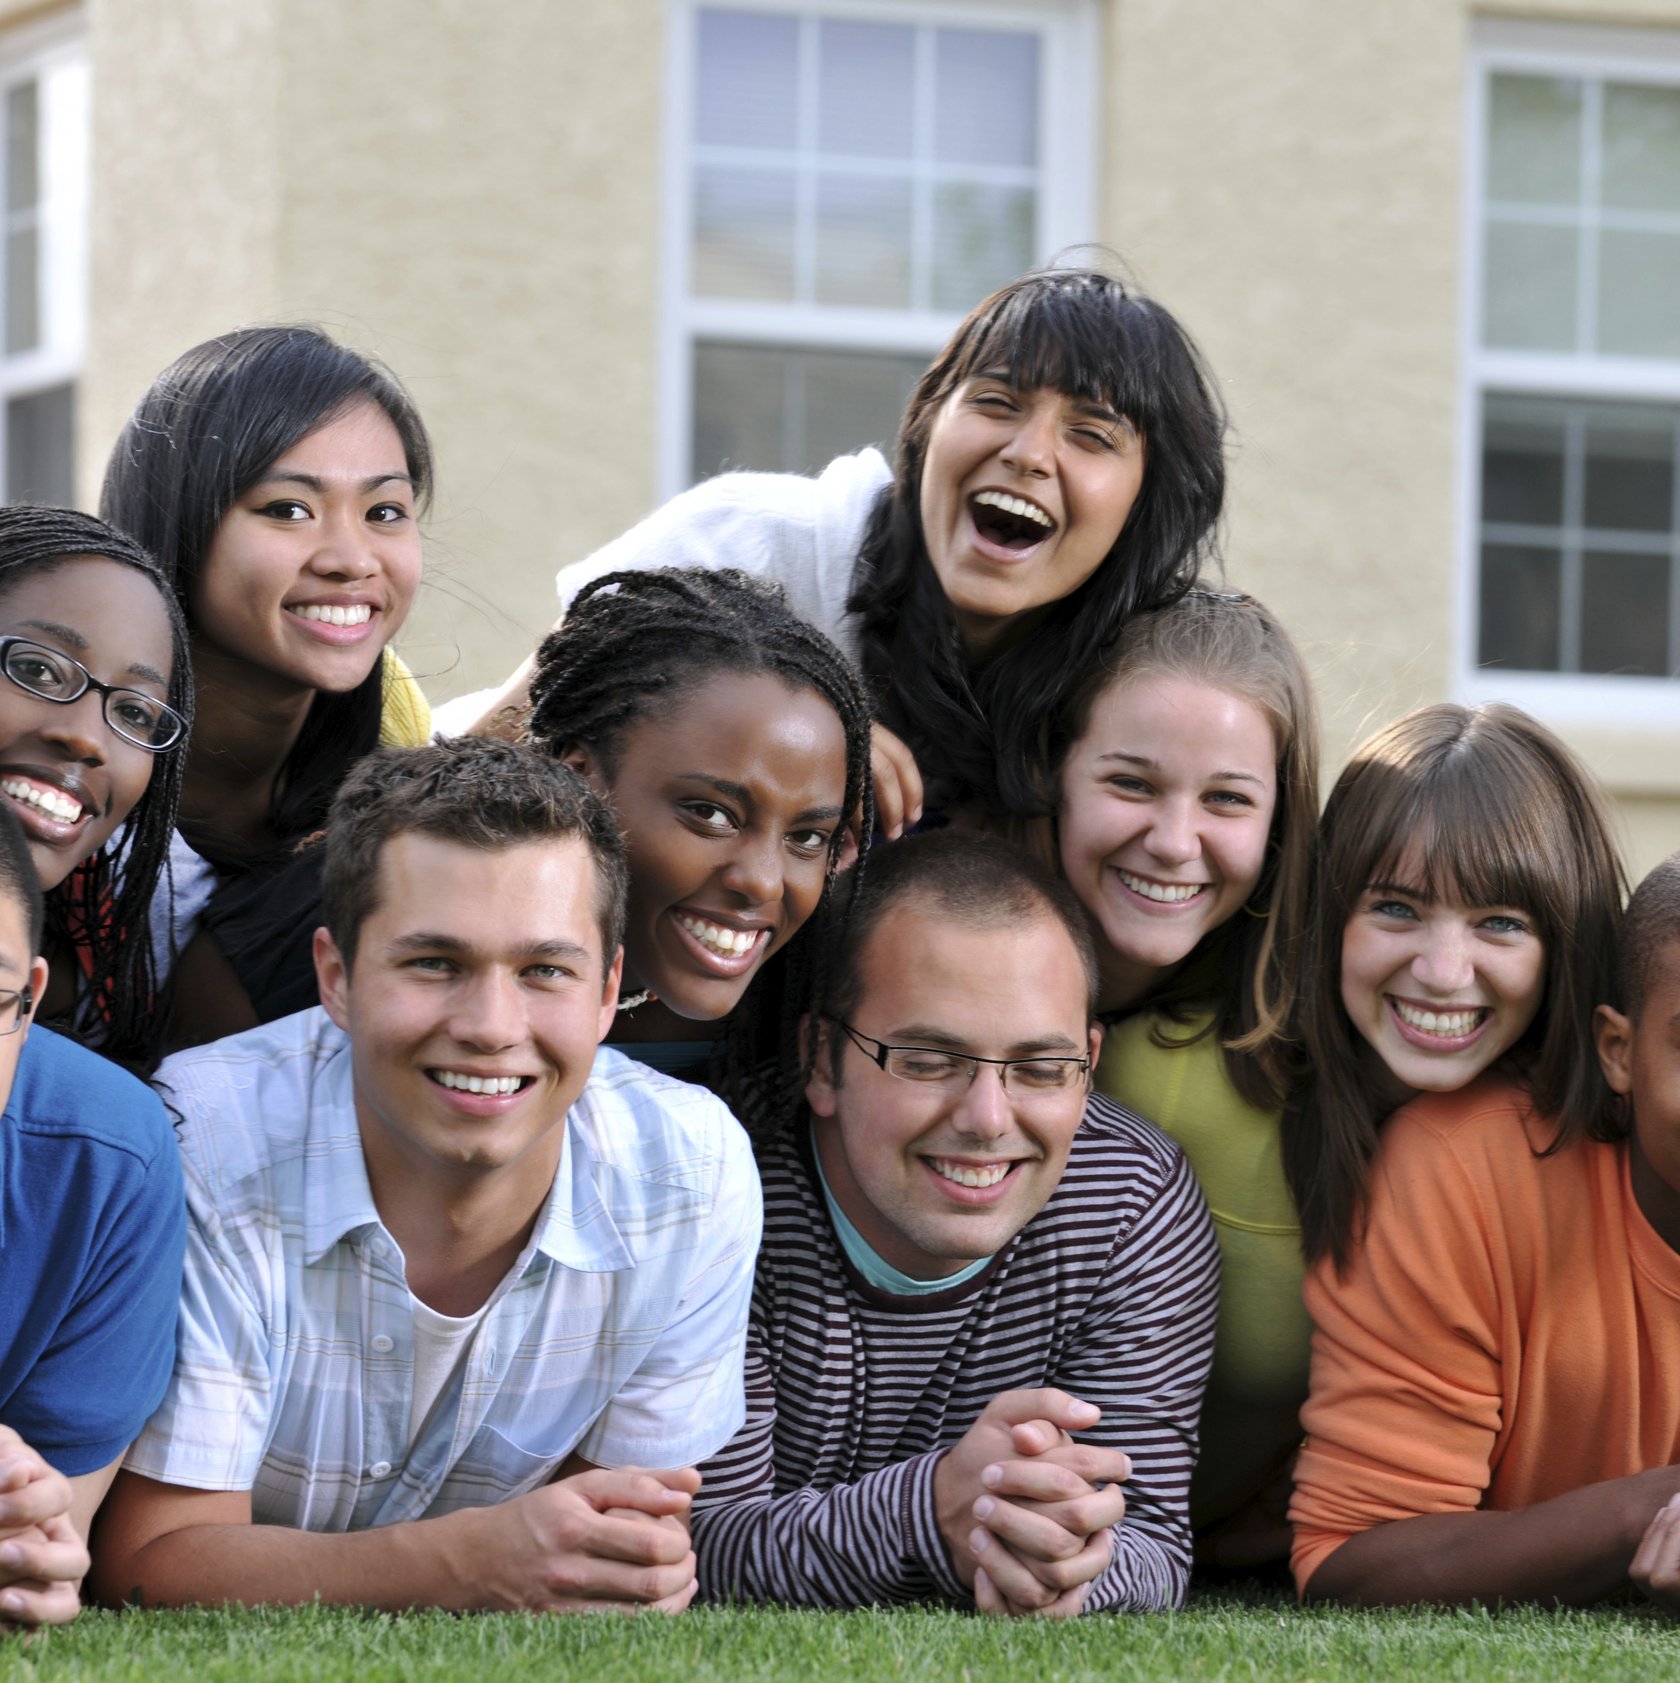 mixed group of laughing young people